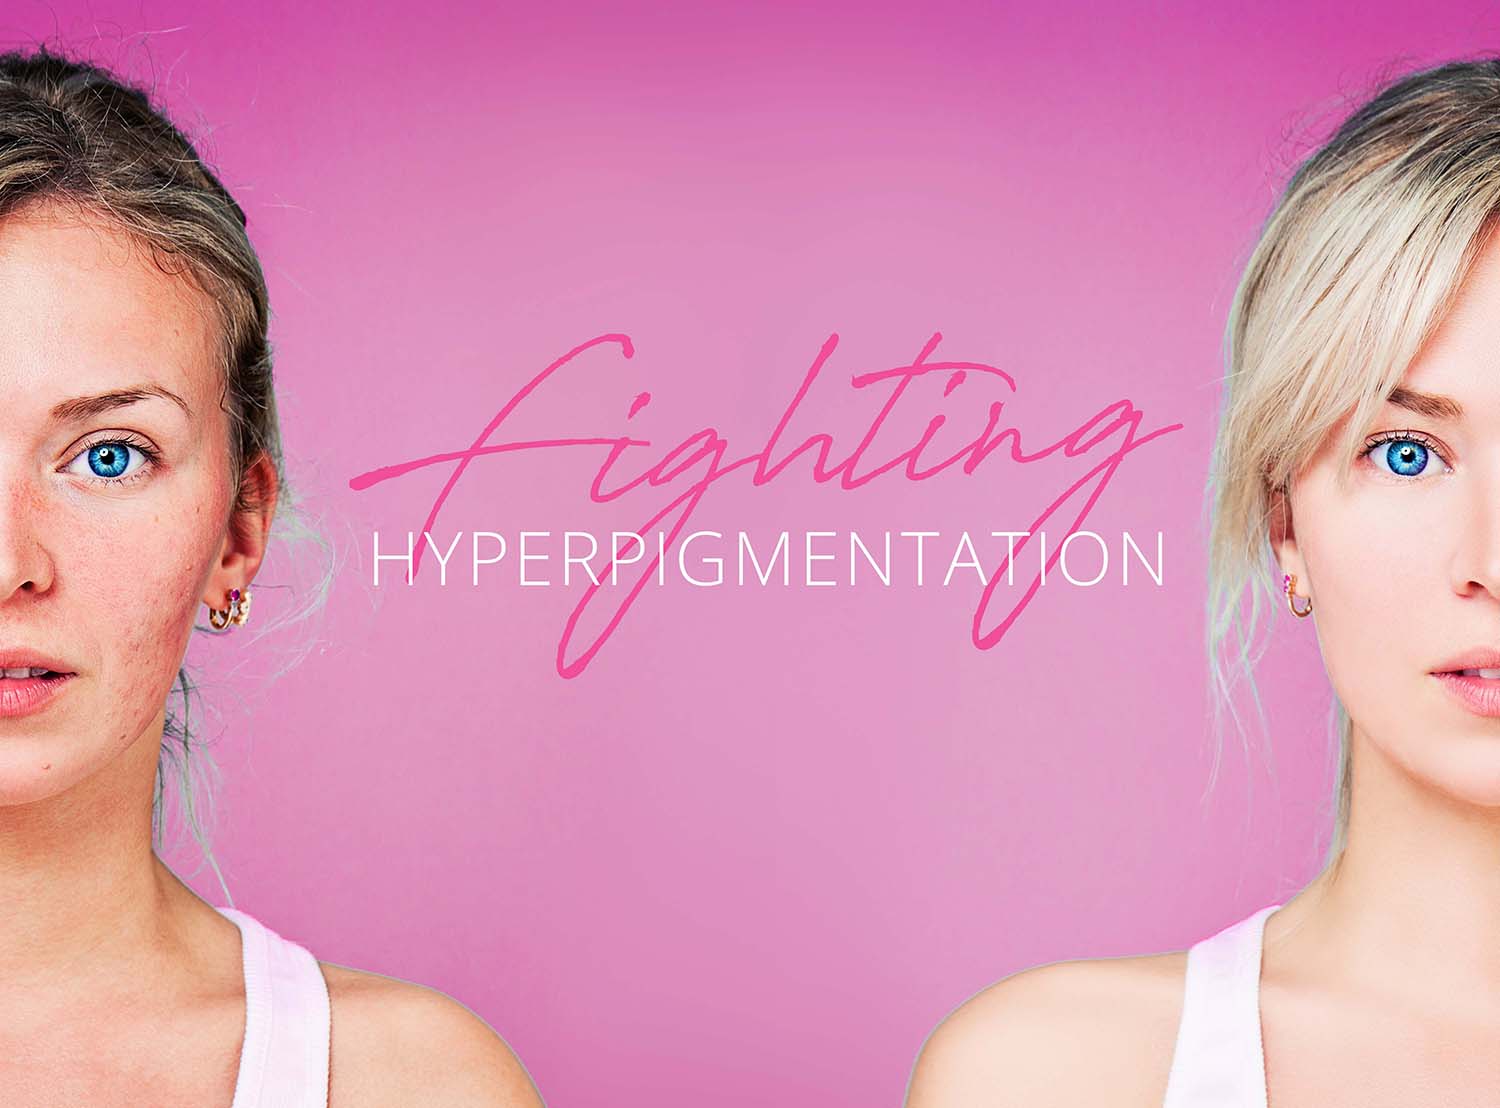 Young woman showing before and after hyperpigmentation